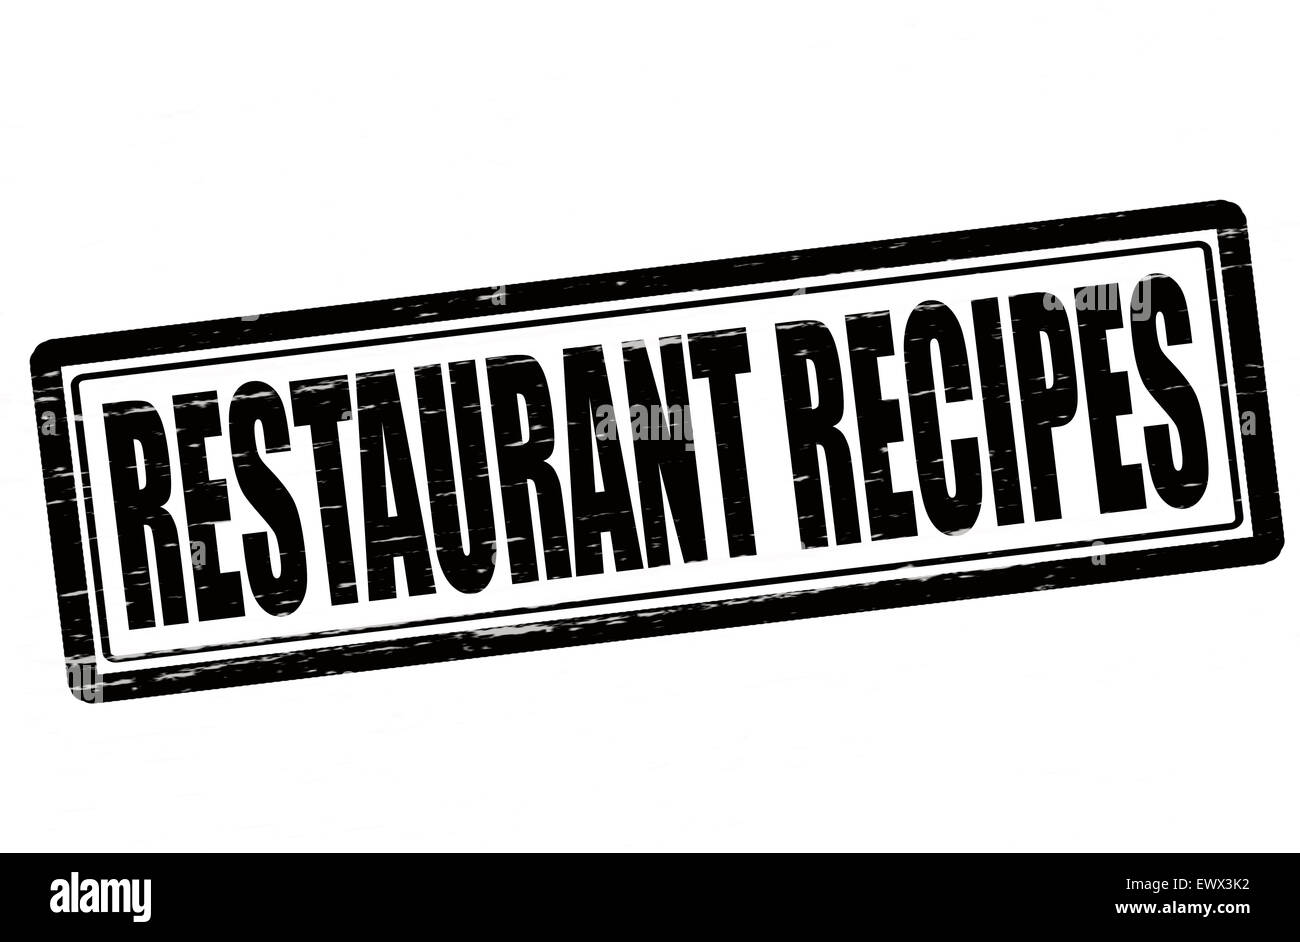 Stamp with text restaurant recipes inside, illustration Stock Photo